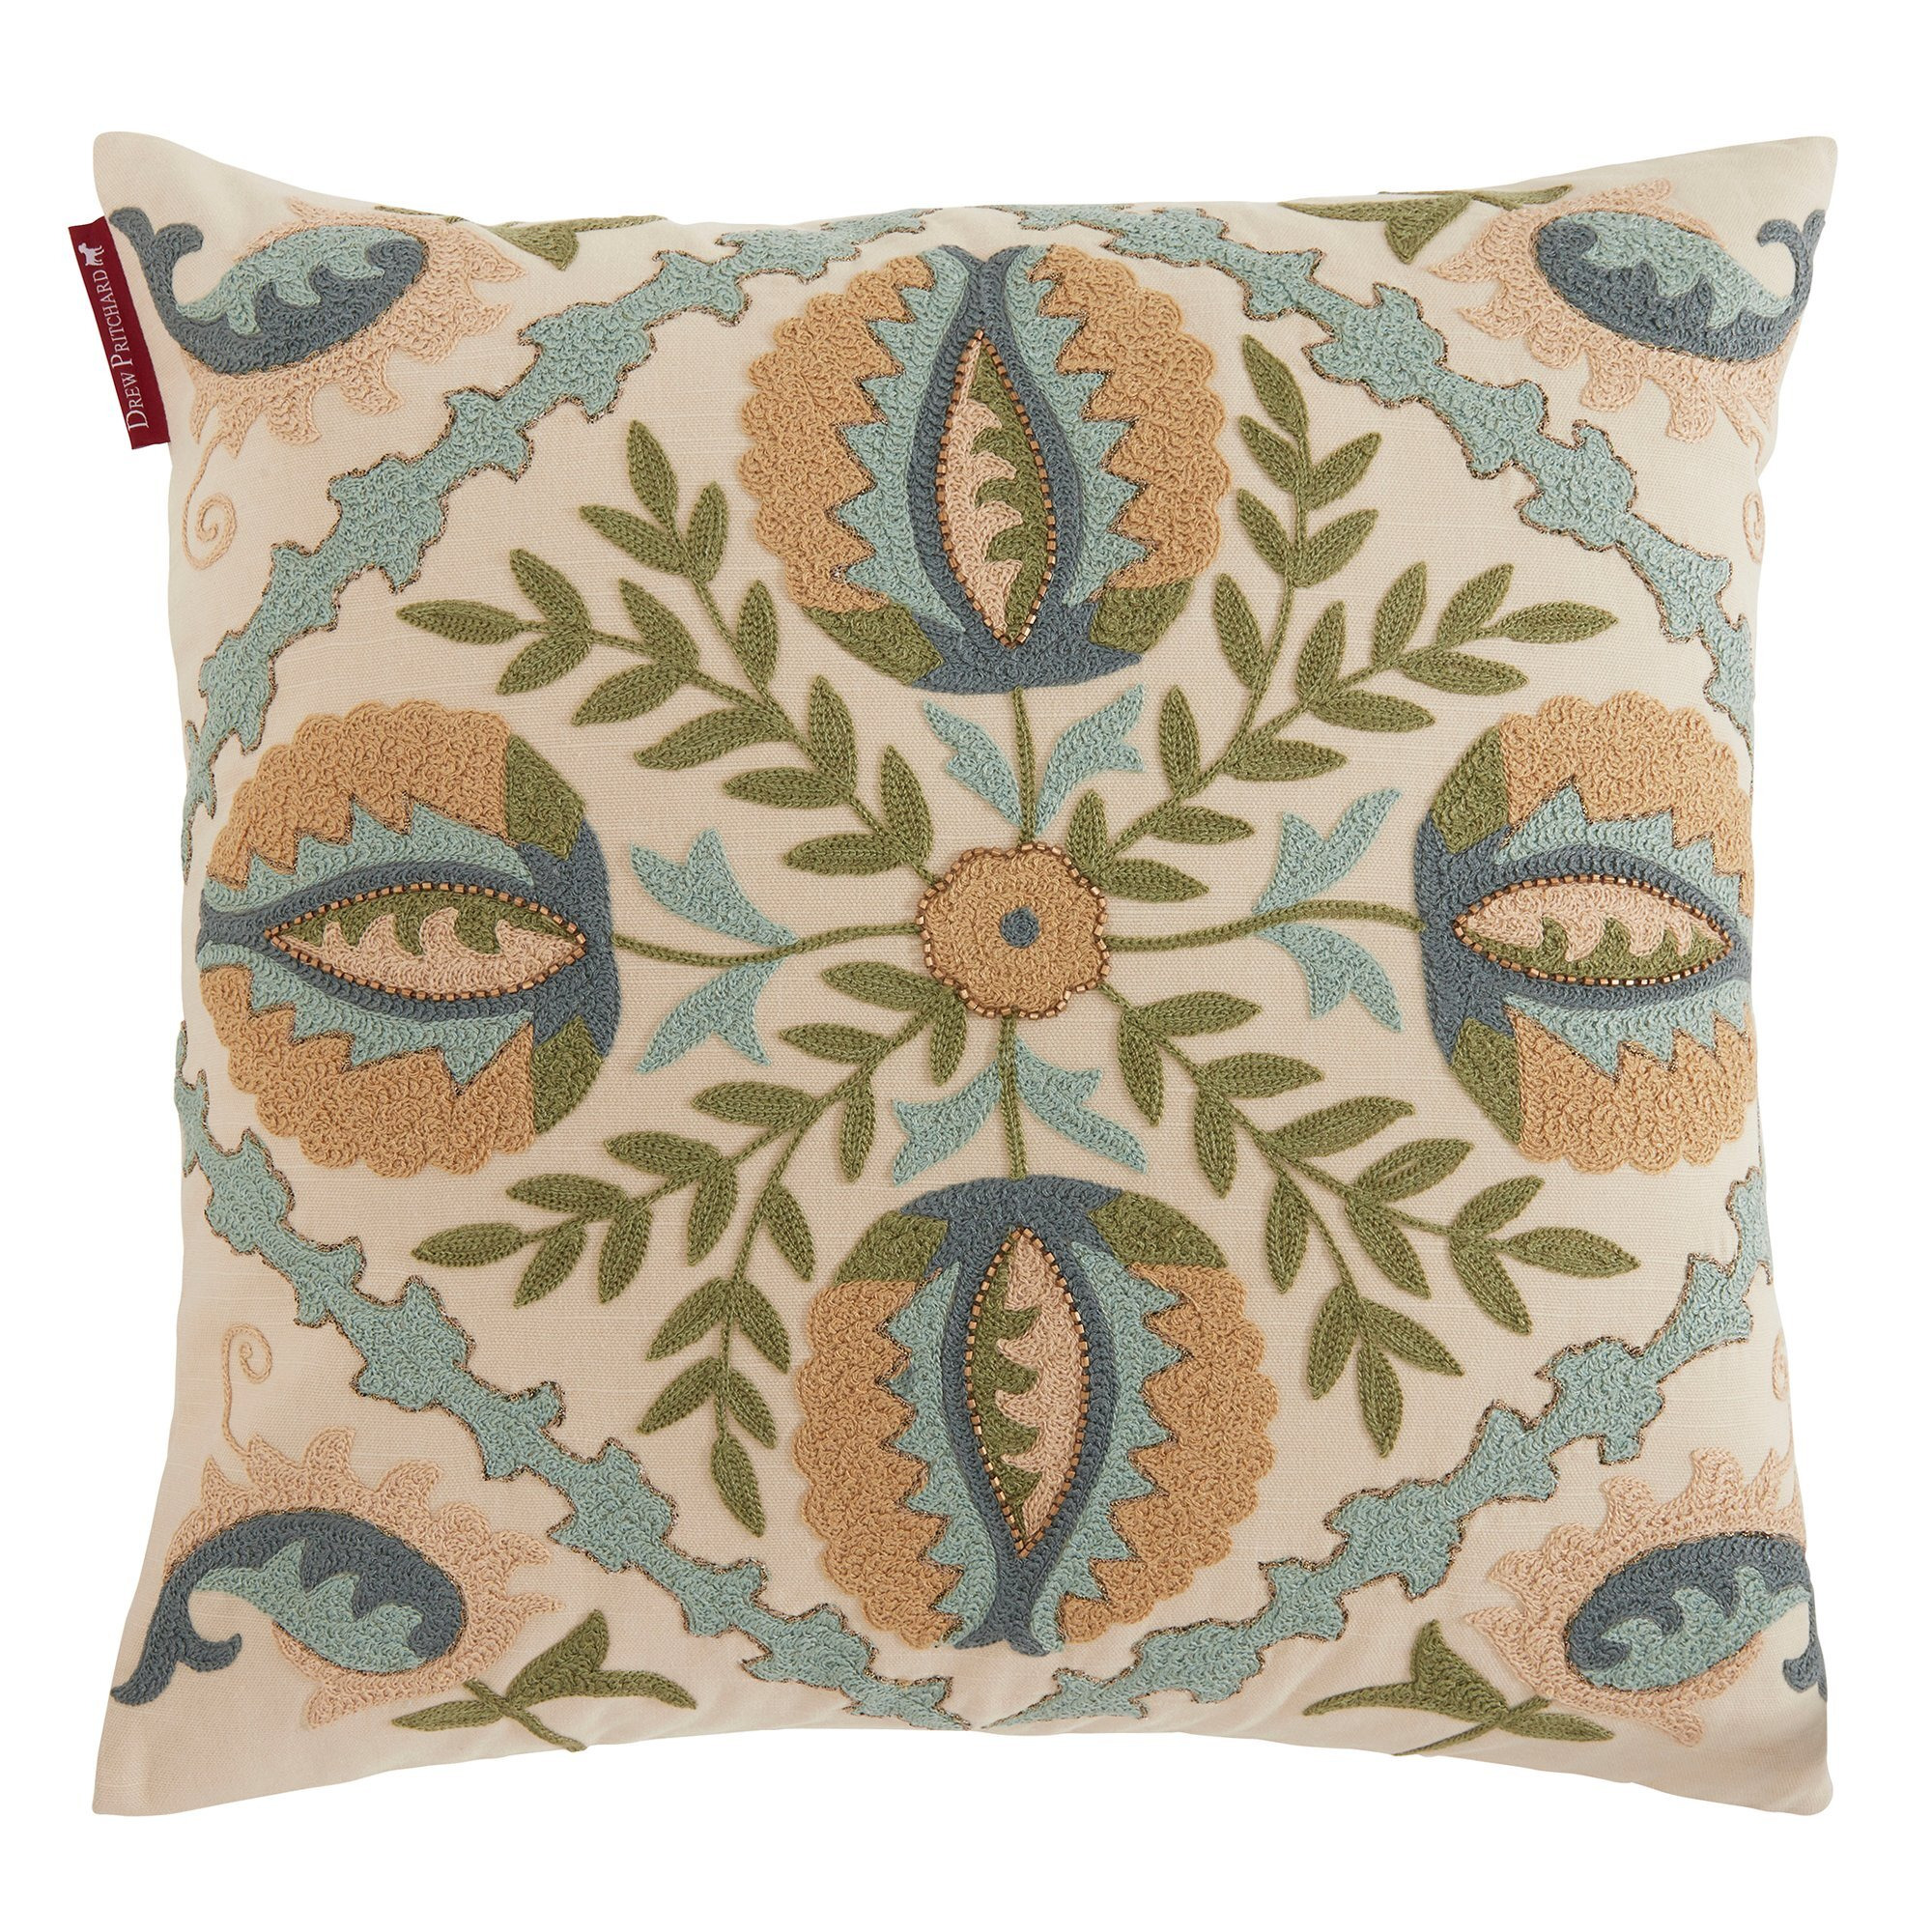 Embroided Chinosiere Cushion, Square, Neutral - Barker & Stonehouse - image 1